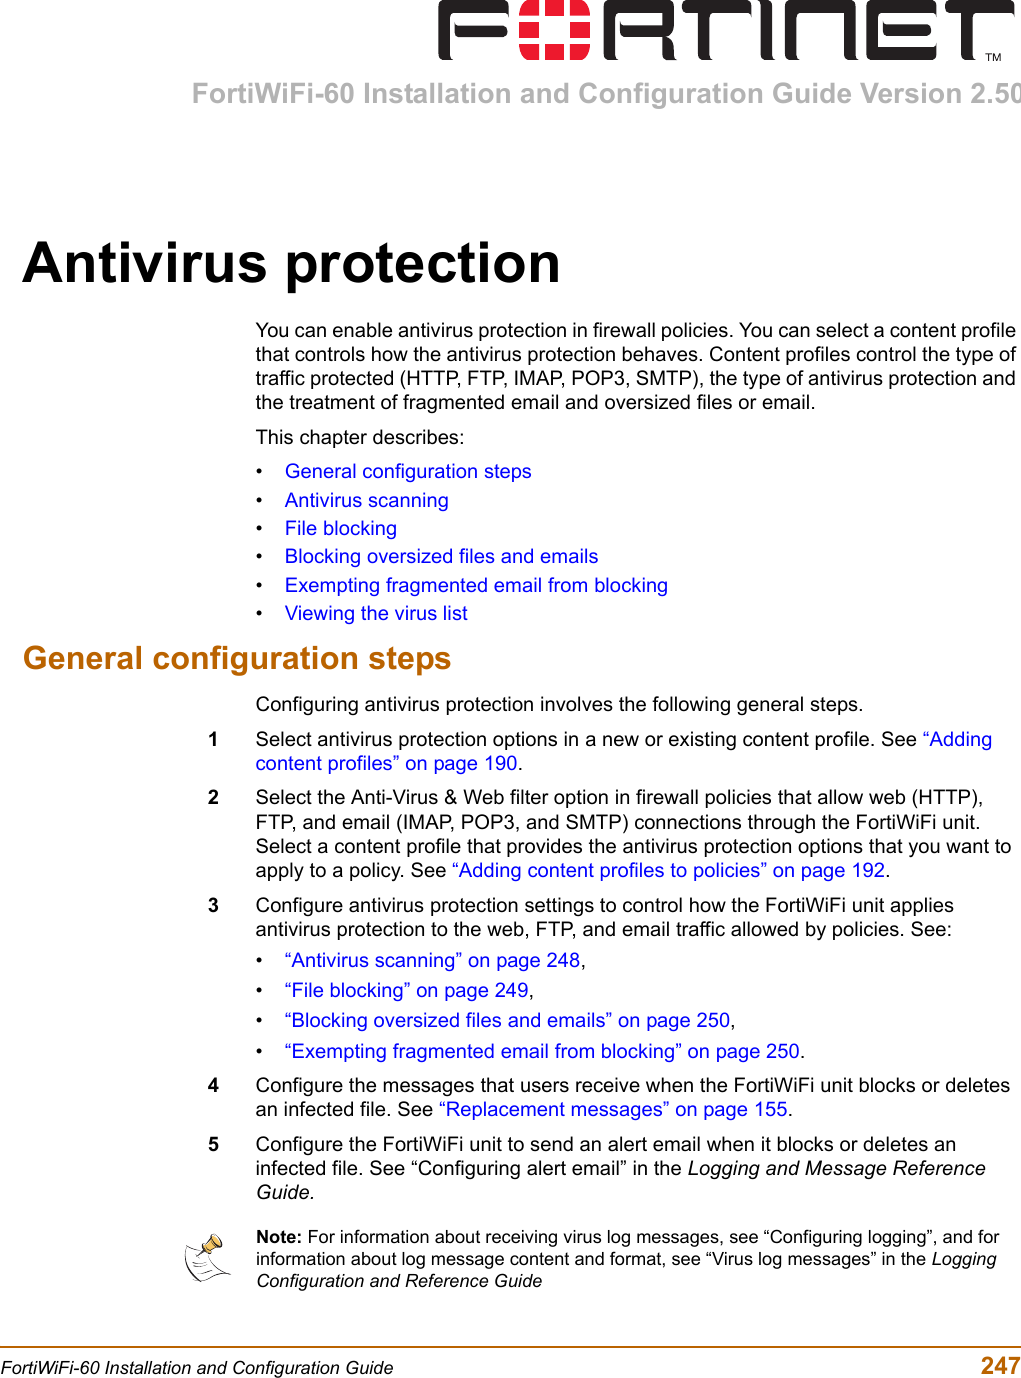 FortiWiFi-60 Installation and Configuration Guide Version 2.50FortiWiFi-60 Installation and Configuration Guide  247Antivirus protectionYou can enable antivirus protection in firewall policies. You can select a content profile that controls how the antivirus protection behaves. Content profiles control the type of traffic protected (HTTP, FTP, IMAP, POP3, SMTP), the type of antivirus protection and the treatment of fragmented email and oversized files or email.This chapter describes:•General configuration steps•Antivirus scanning•File blocking•Blocking oversized files and emails•Exempting fragmented email from blocking•Viewing the virus listGeneral configuration stepsConfiguring antivirus protection involves the following general steps.1Select antivirus protection options in a new or existing content profile. See “Adding content profiles” on page 190.2Select the Anti-Virus &amp; Web filter option in firewall policies that allow web (HTTP), FTP, and email (IMAP, POP3, and SMTP) connections through the FortiWiFi unit. Select a content profile that provides the antivirus protection options that you want to apply to a policy. See “Adding content profiles to policies” on page 192.3Configure antivirus protection settings to control how the FortiWiFi unit applies antivirus protection to the web, FTP, and email traffic allowed by policies. See:•“Antivirus scanning” on page 248,•“File blocking” on page 249,•“Blocking oversized files and emails” on page 250,•“Exempting fragmented email from blocking” on page 250.4Configure the messages that users receive when the FortiWiFi unit blocks or deletes an infected file. See “Replacement messages” on page 155.5Configure the FortiWiFi unit to send an alert email when it blocks or deletes an infected file. See “Configuring alert email” in the Logging and Message Reference Guide.Note: For information about receiving virus log messages, see “Configuring logging”, and for information about log message content and format, see “Virus log messages” in the Logging Configuration and Reference Guide